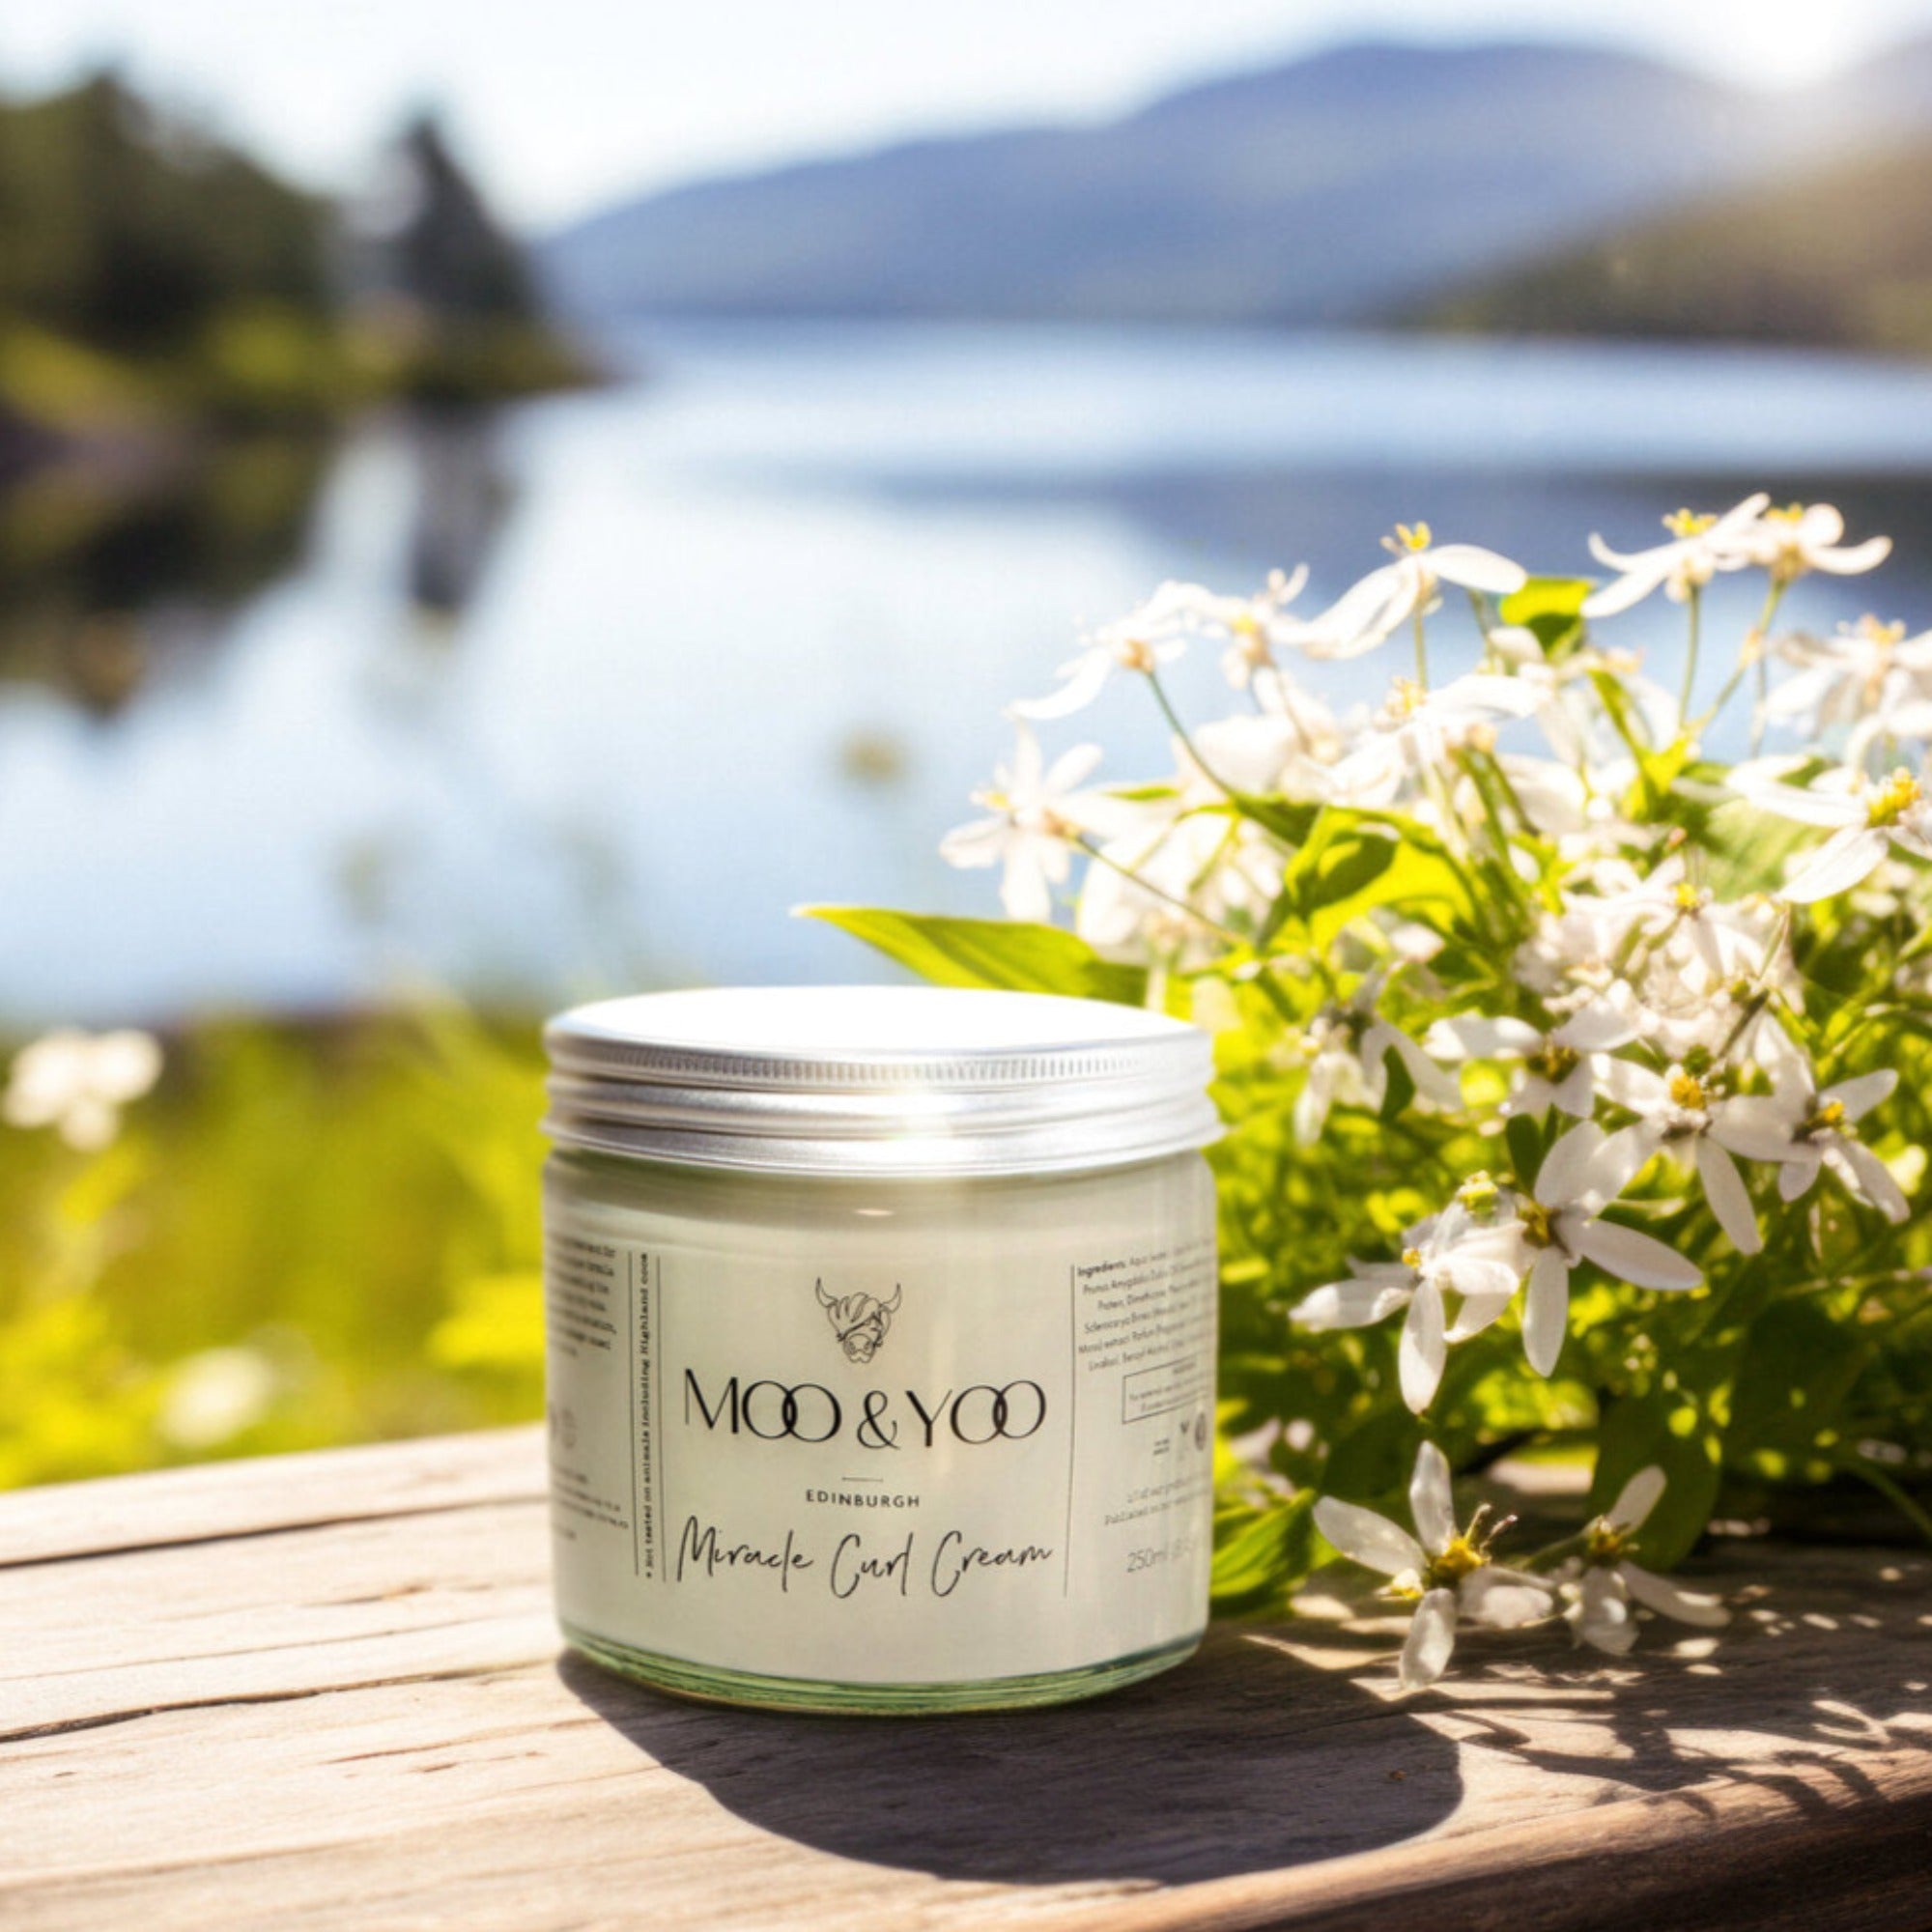 A glass jar of Moo and Yoo Miracle Curl Cream with an aluminium lid placed on a rustic wooden bench overlooking a Scottish Loch and hills. It is a spring day and there are white spring flowers behind it.